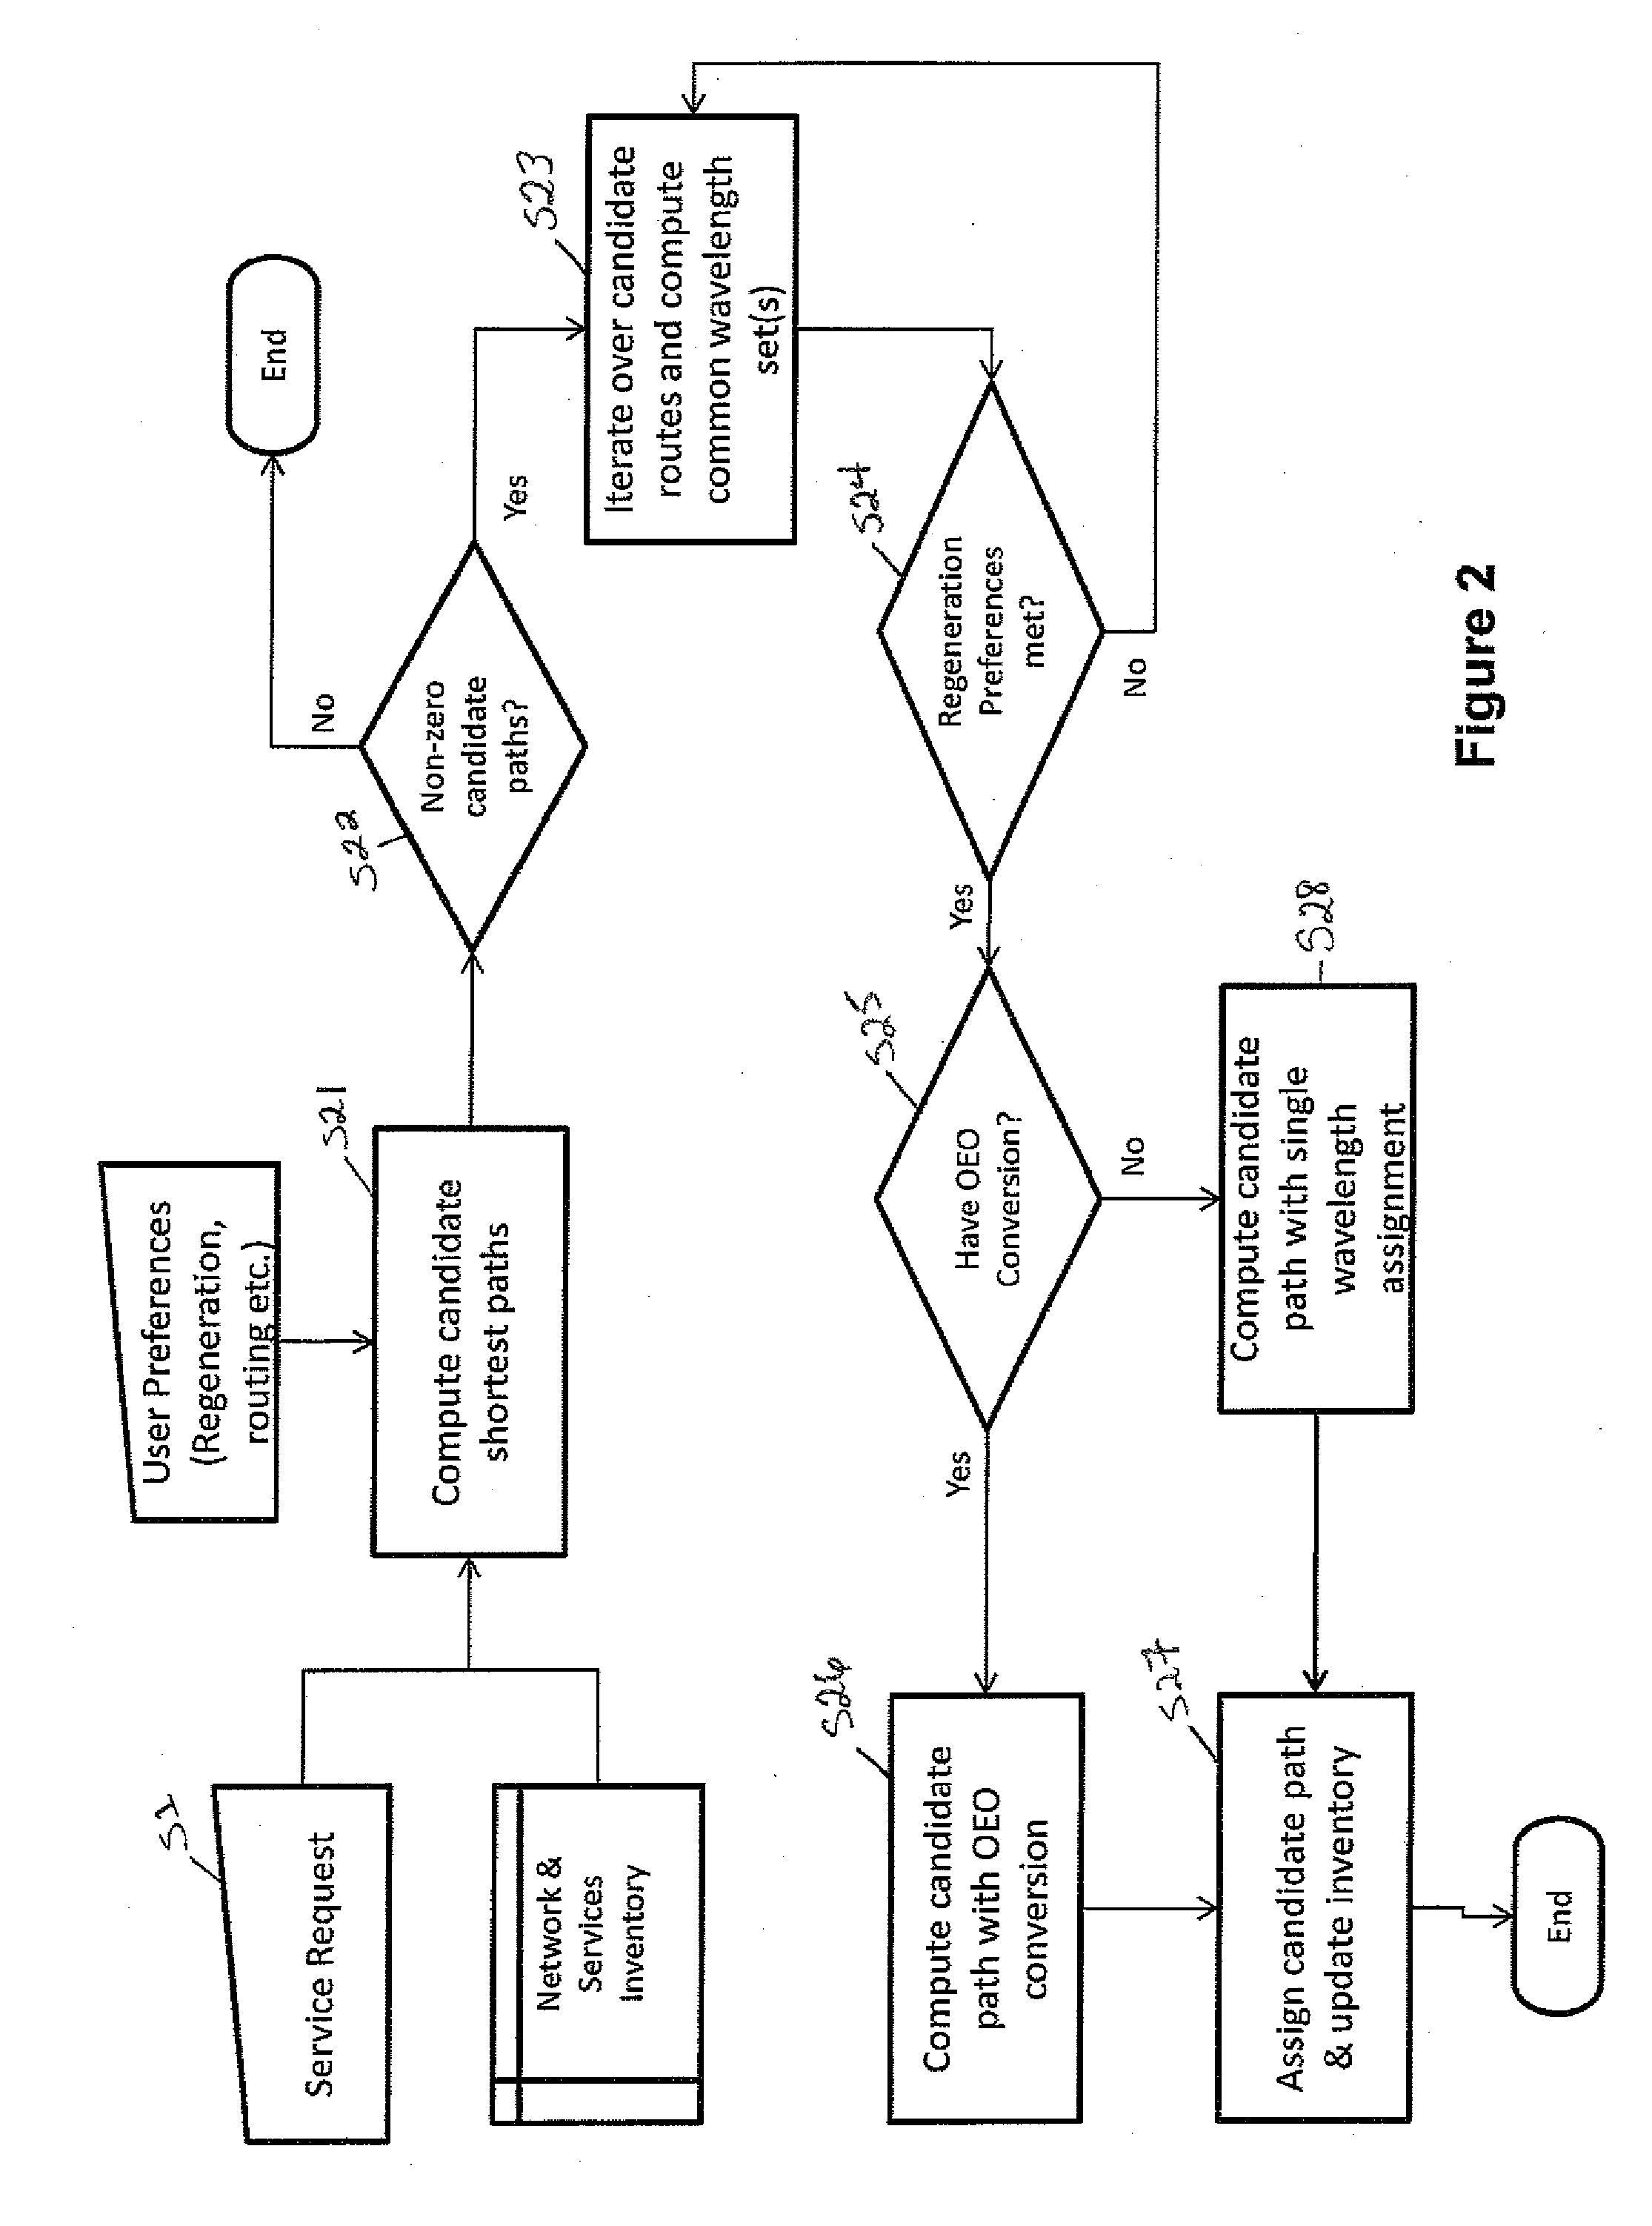 System and method for automated provisioning of services using single step routing and wavelength assignment algorithm in dwdm networks